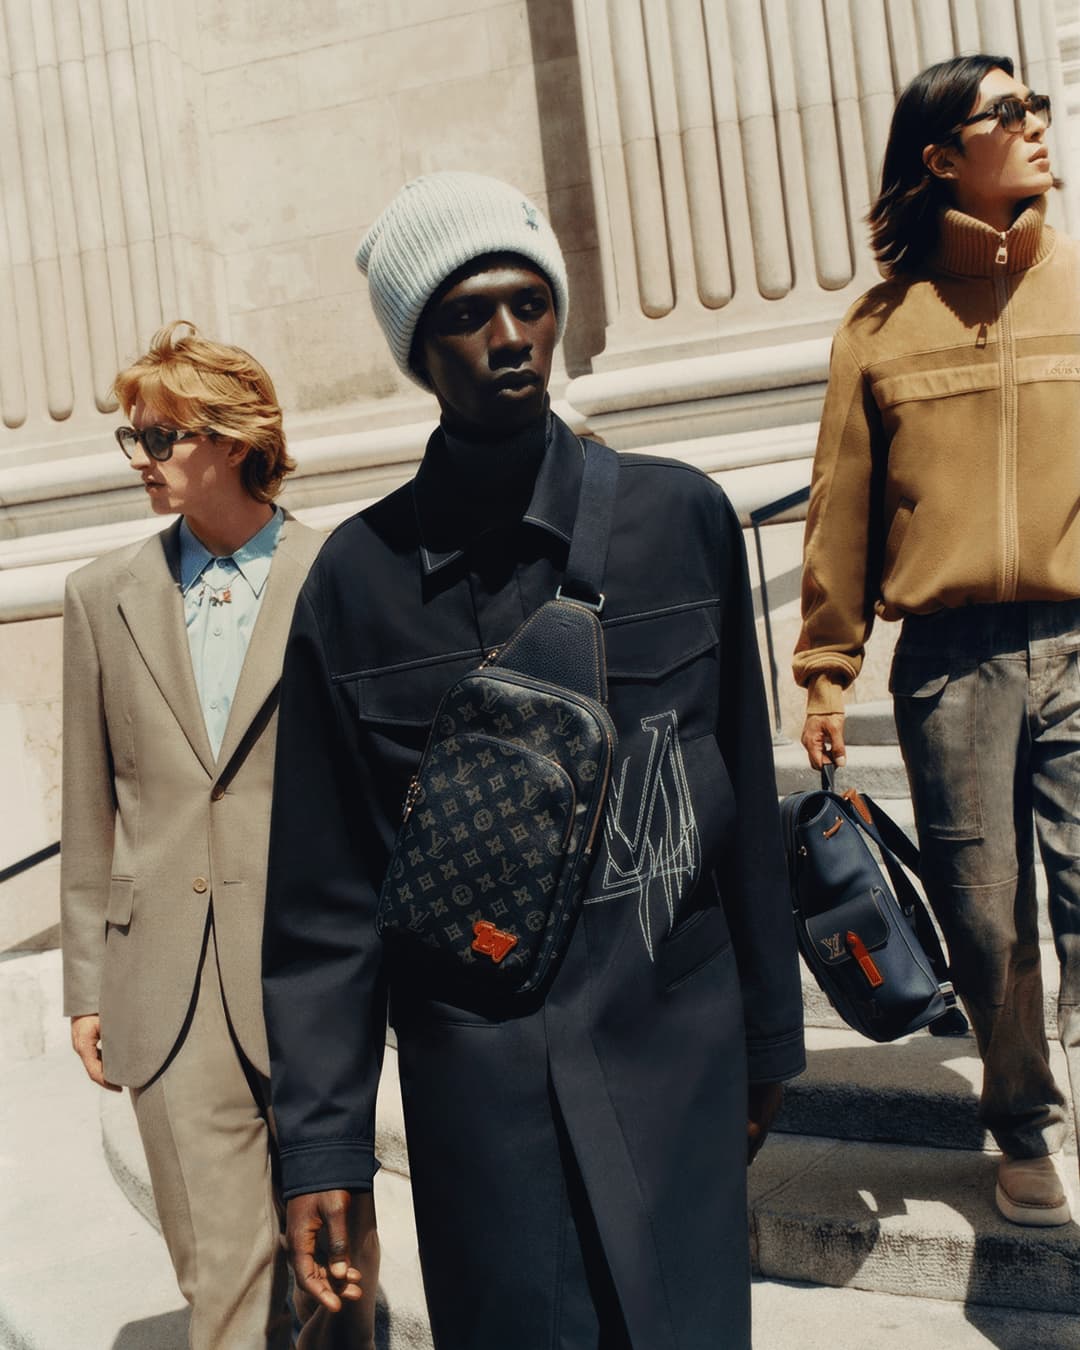 MANIFESTO - BACK-TO-WORK BASICS GET ITS STREET CRED: Louis Vuitton's  Menswear Pre-Spring 2021 Collection